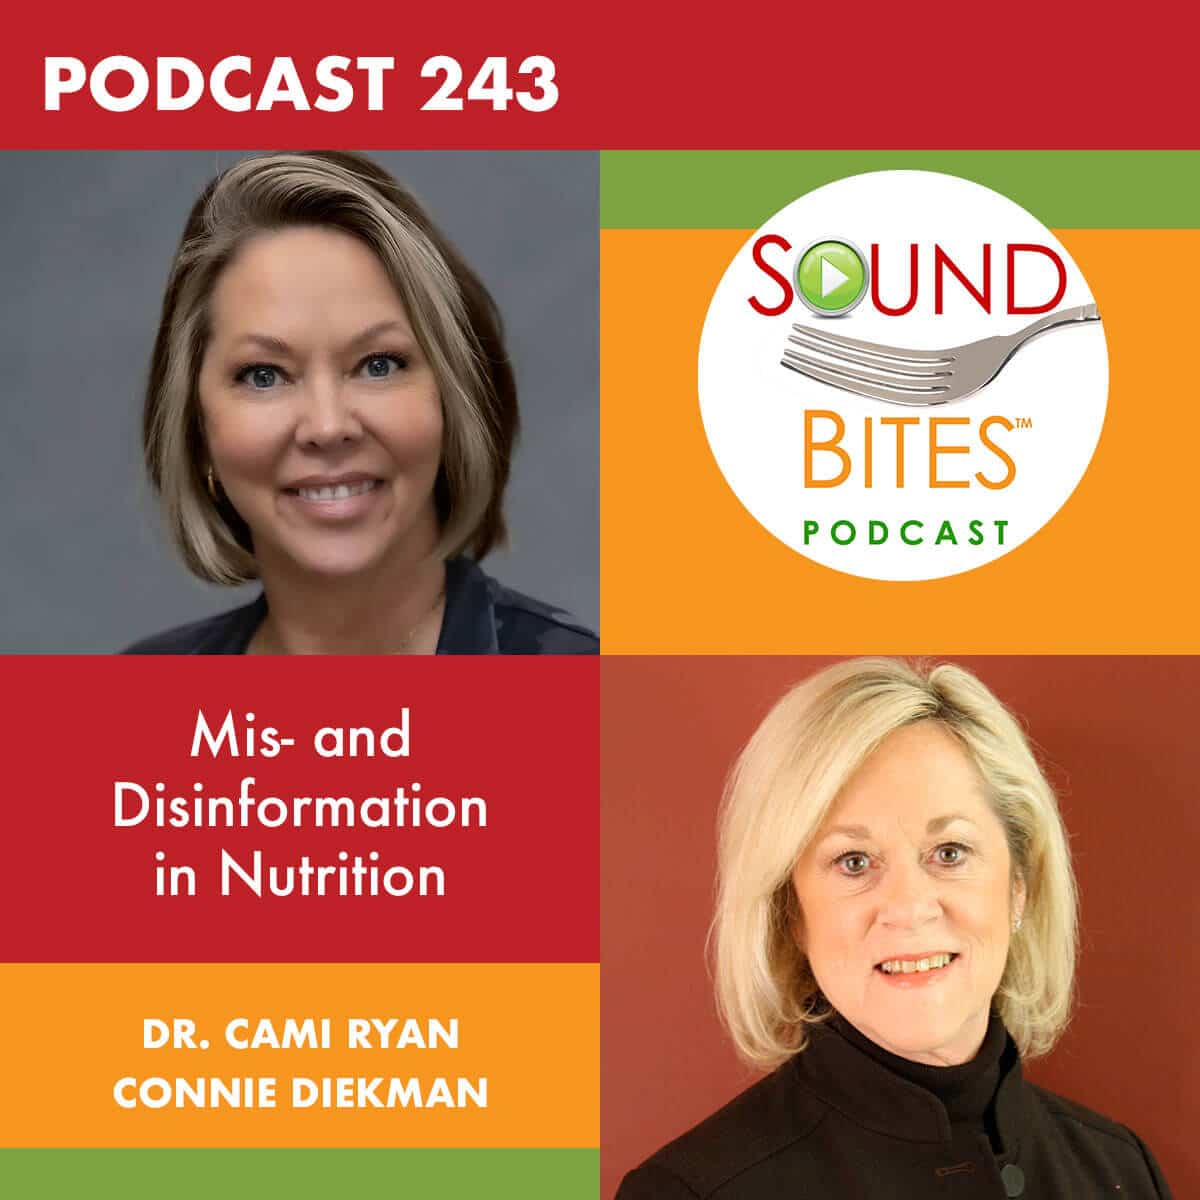 Podcast Episode 243: Mis- and Disinformation in Nutrition: Science, Ethics & Critical Thinking – Dr. Cami Ryan & Connie Diekman